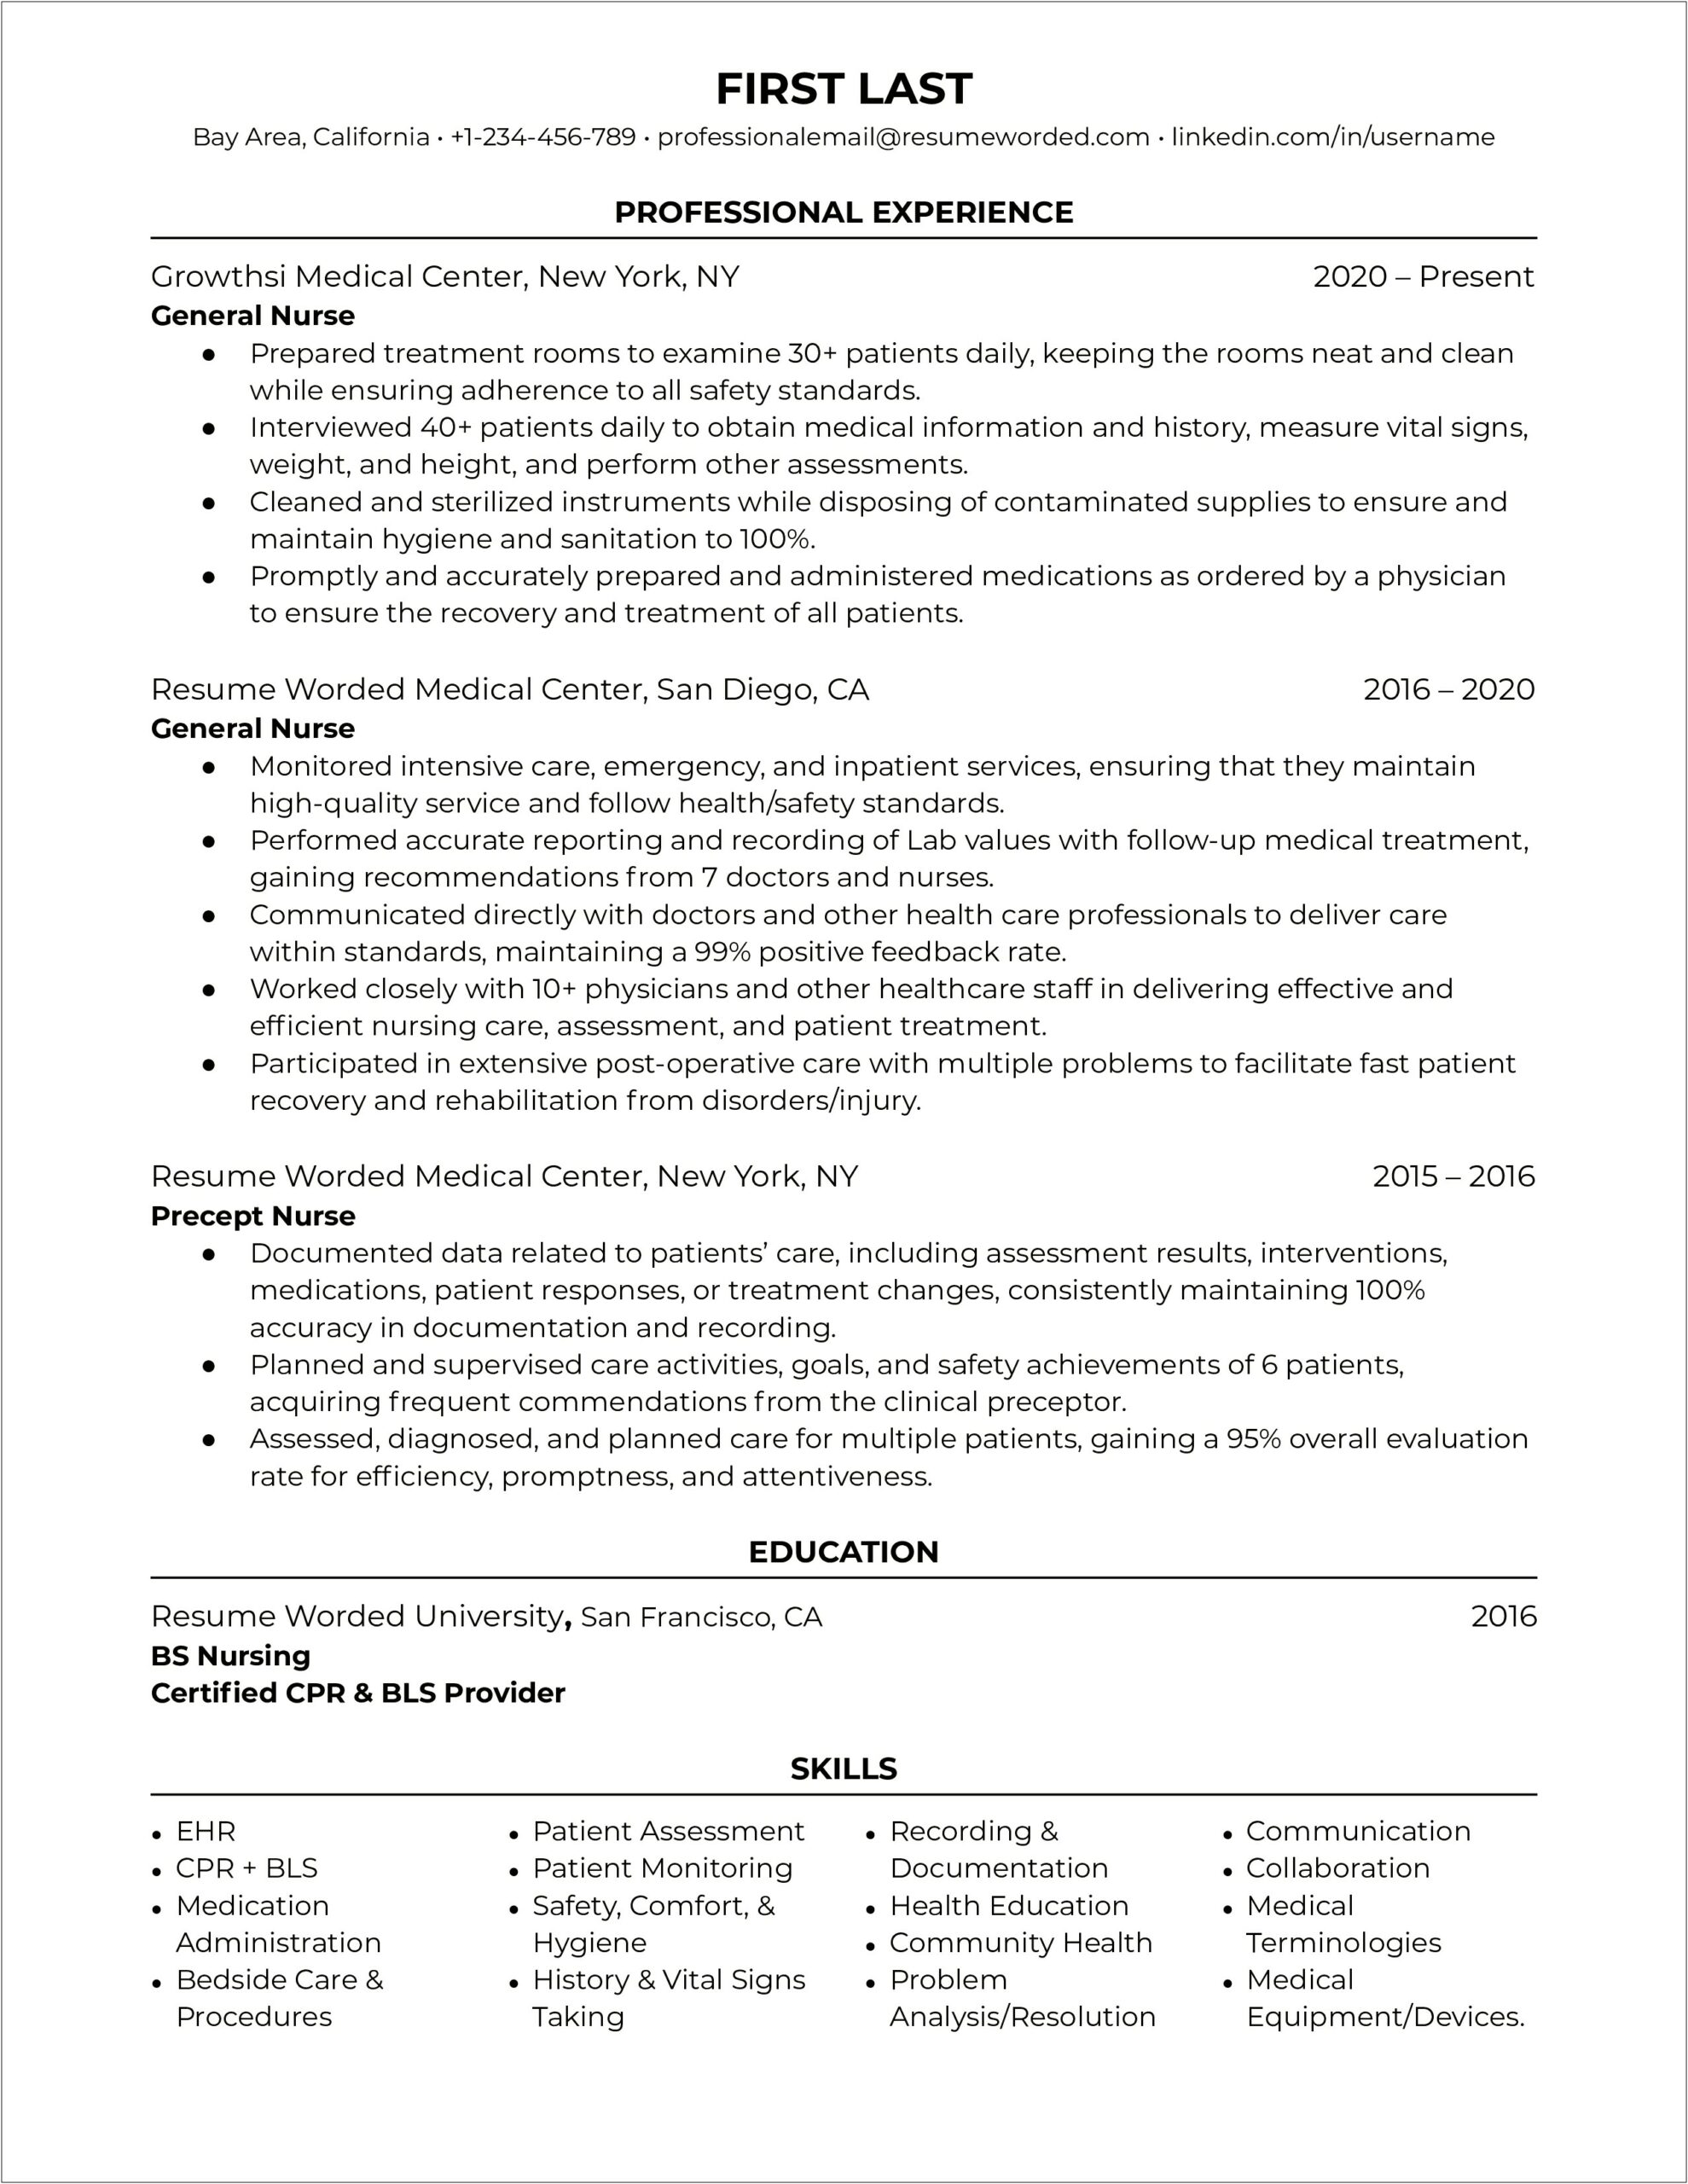 Skills And Abilities Section Of My Resume